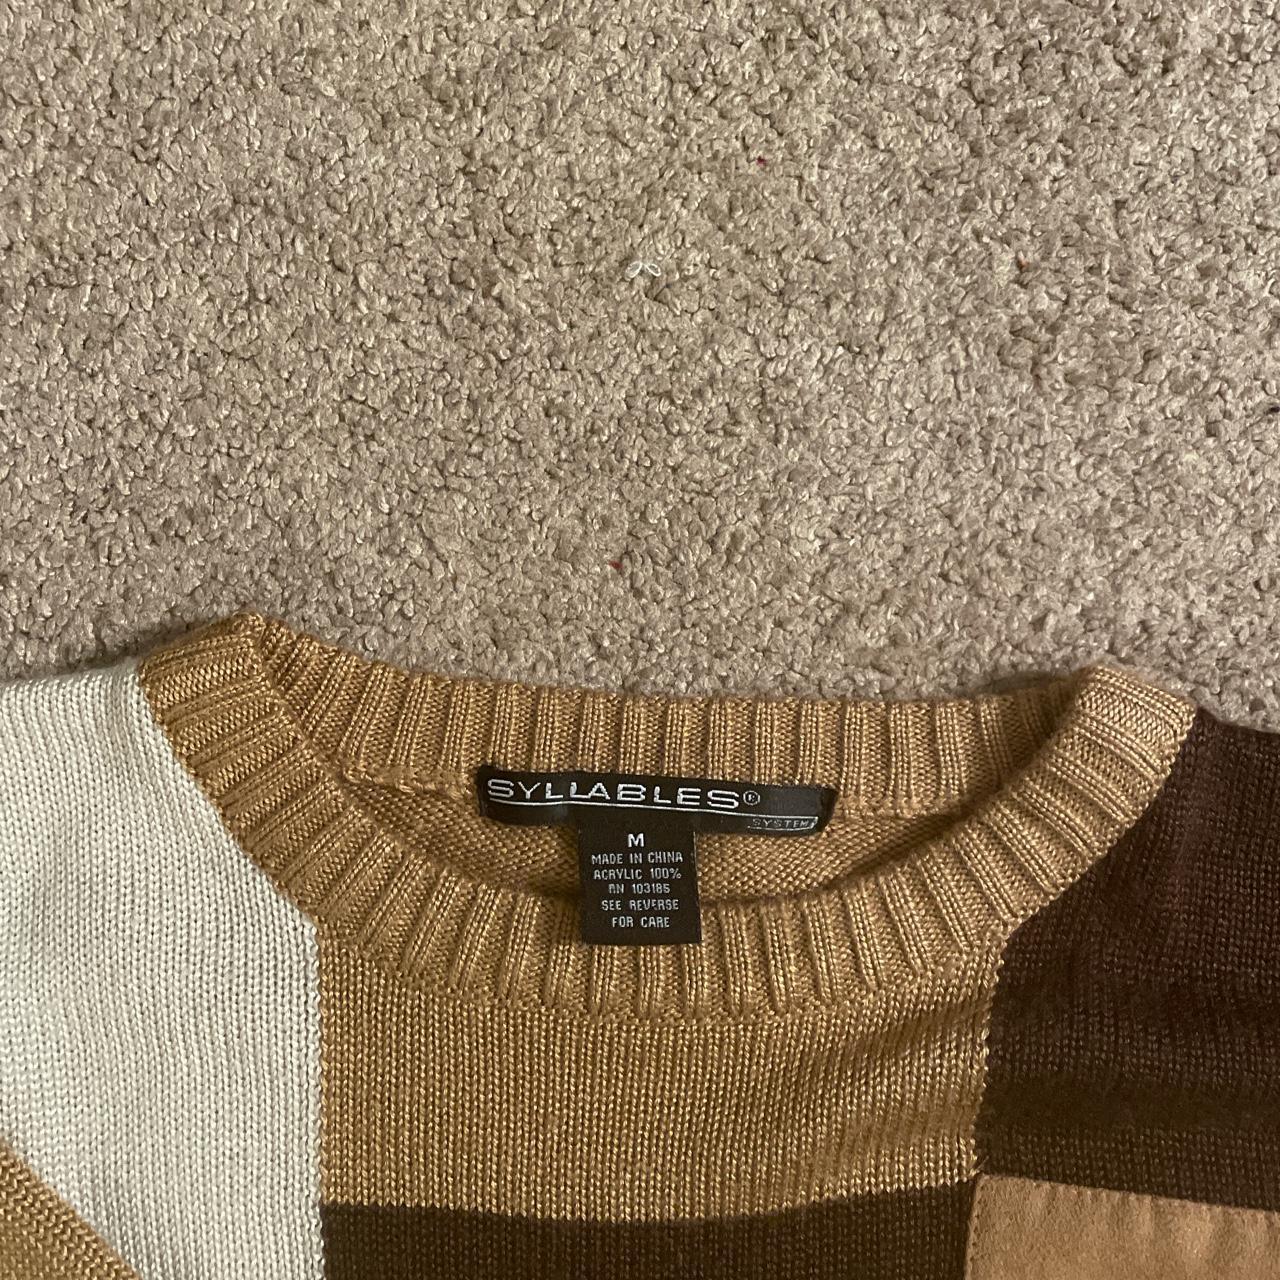 Union Bay Men's Tan and Brown Jumper (4)